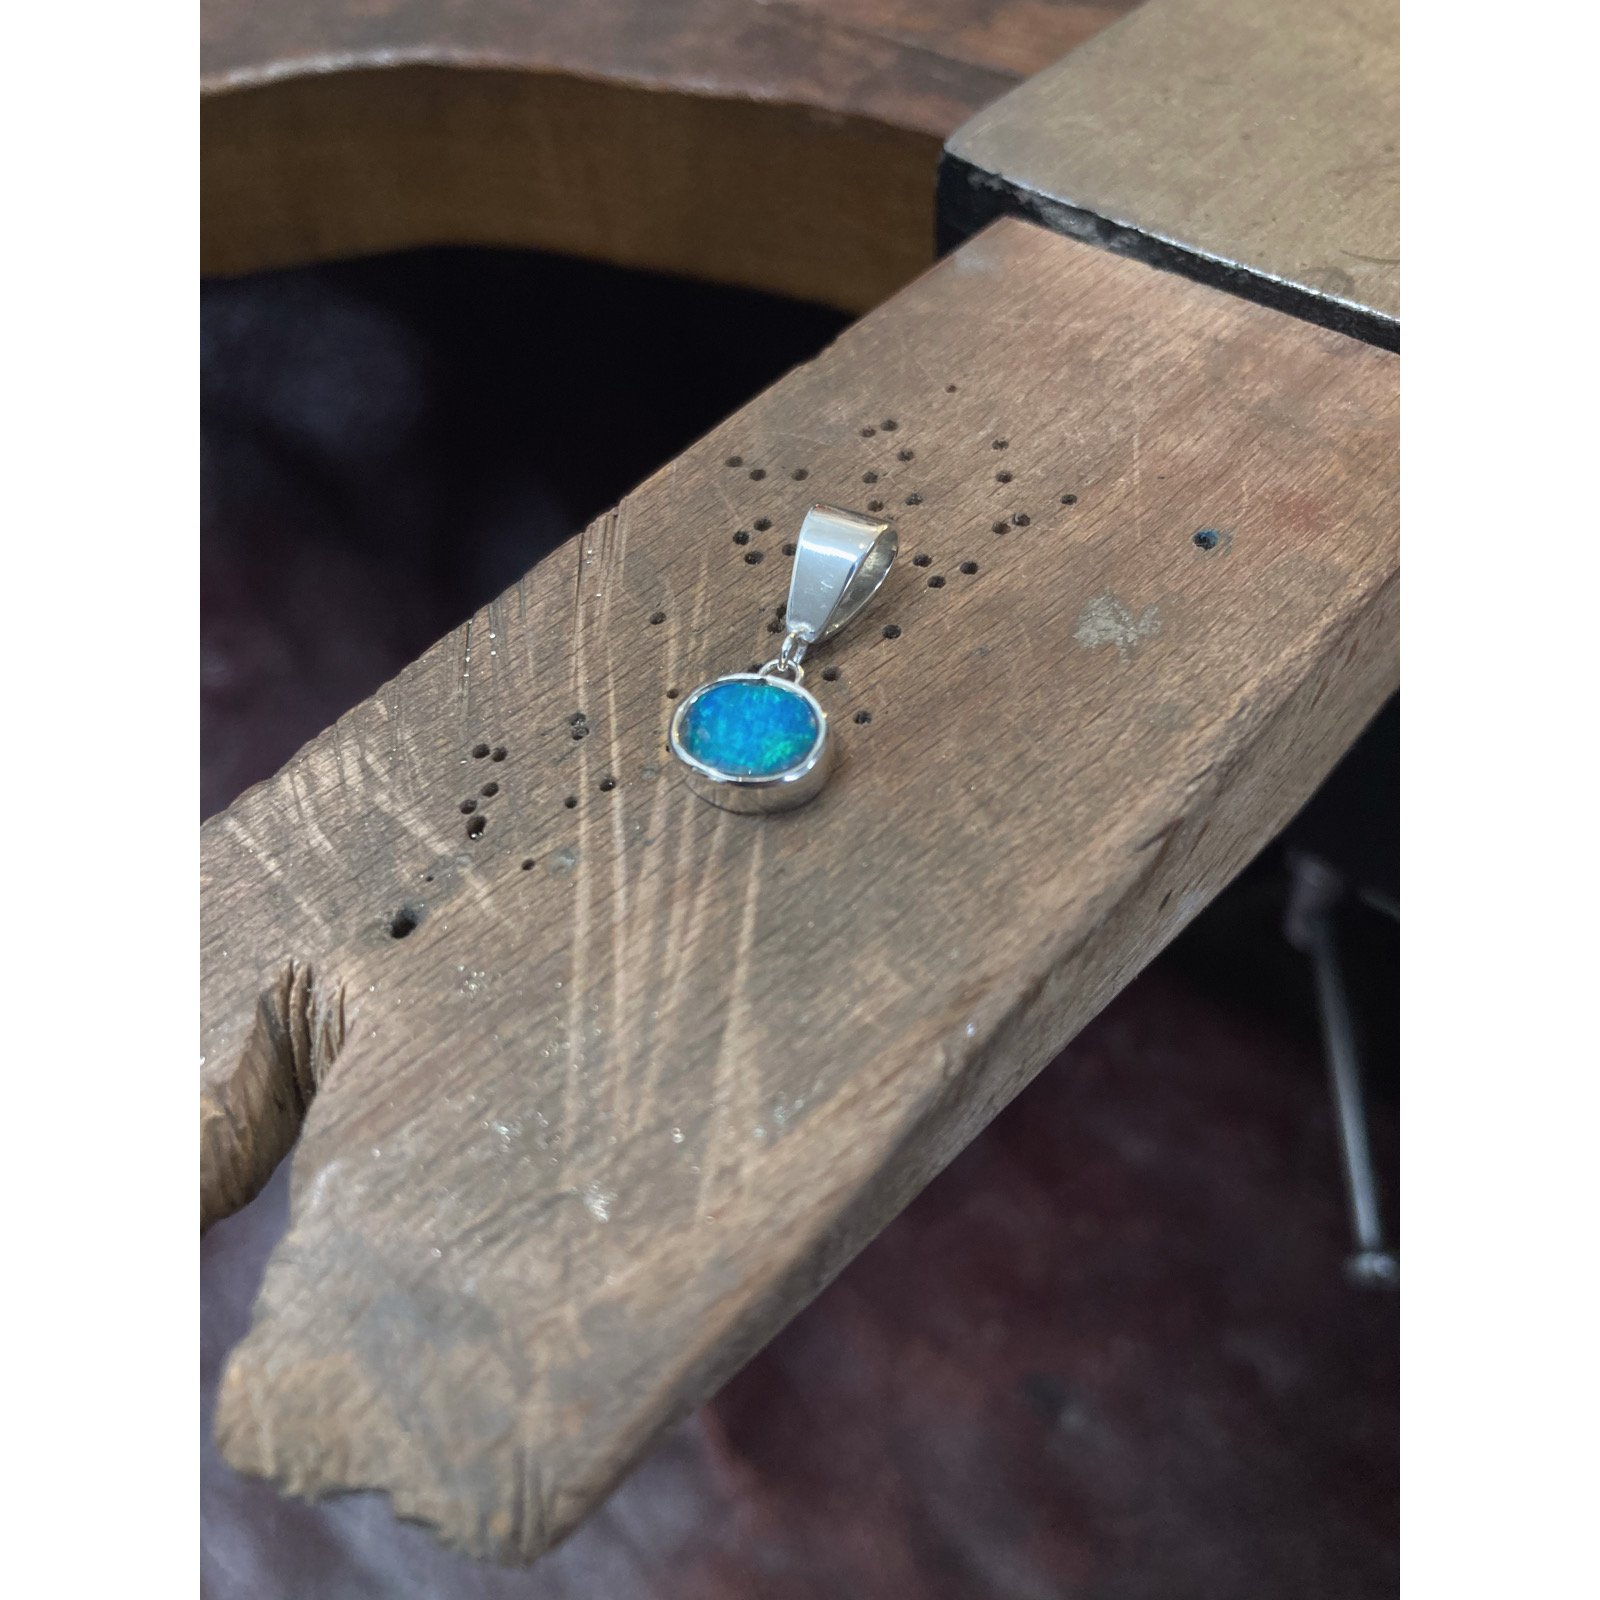 Bespoke made silver &amp; opal pendant using customers own stone.